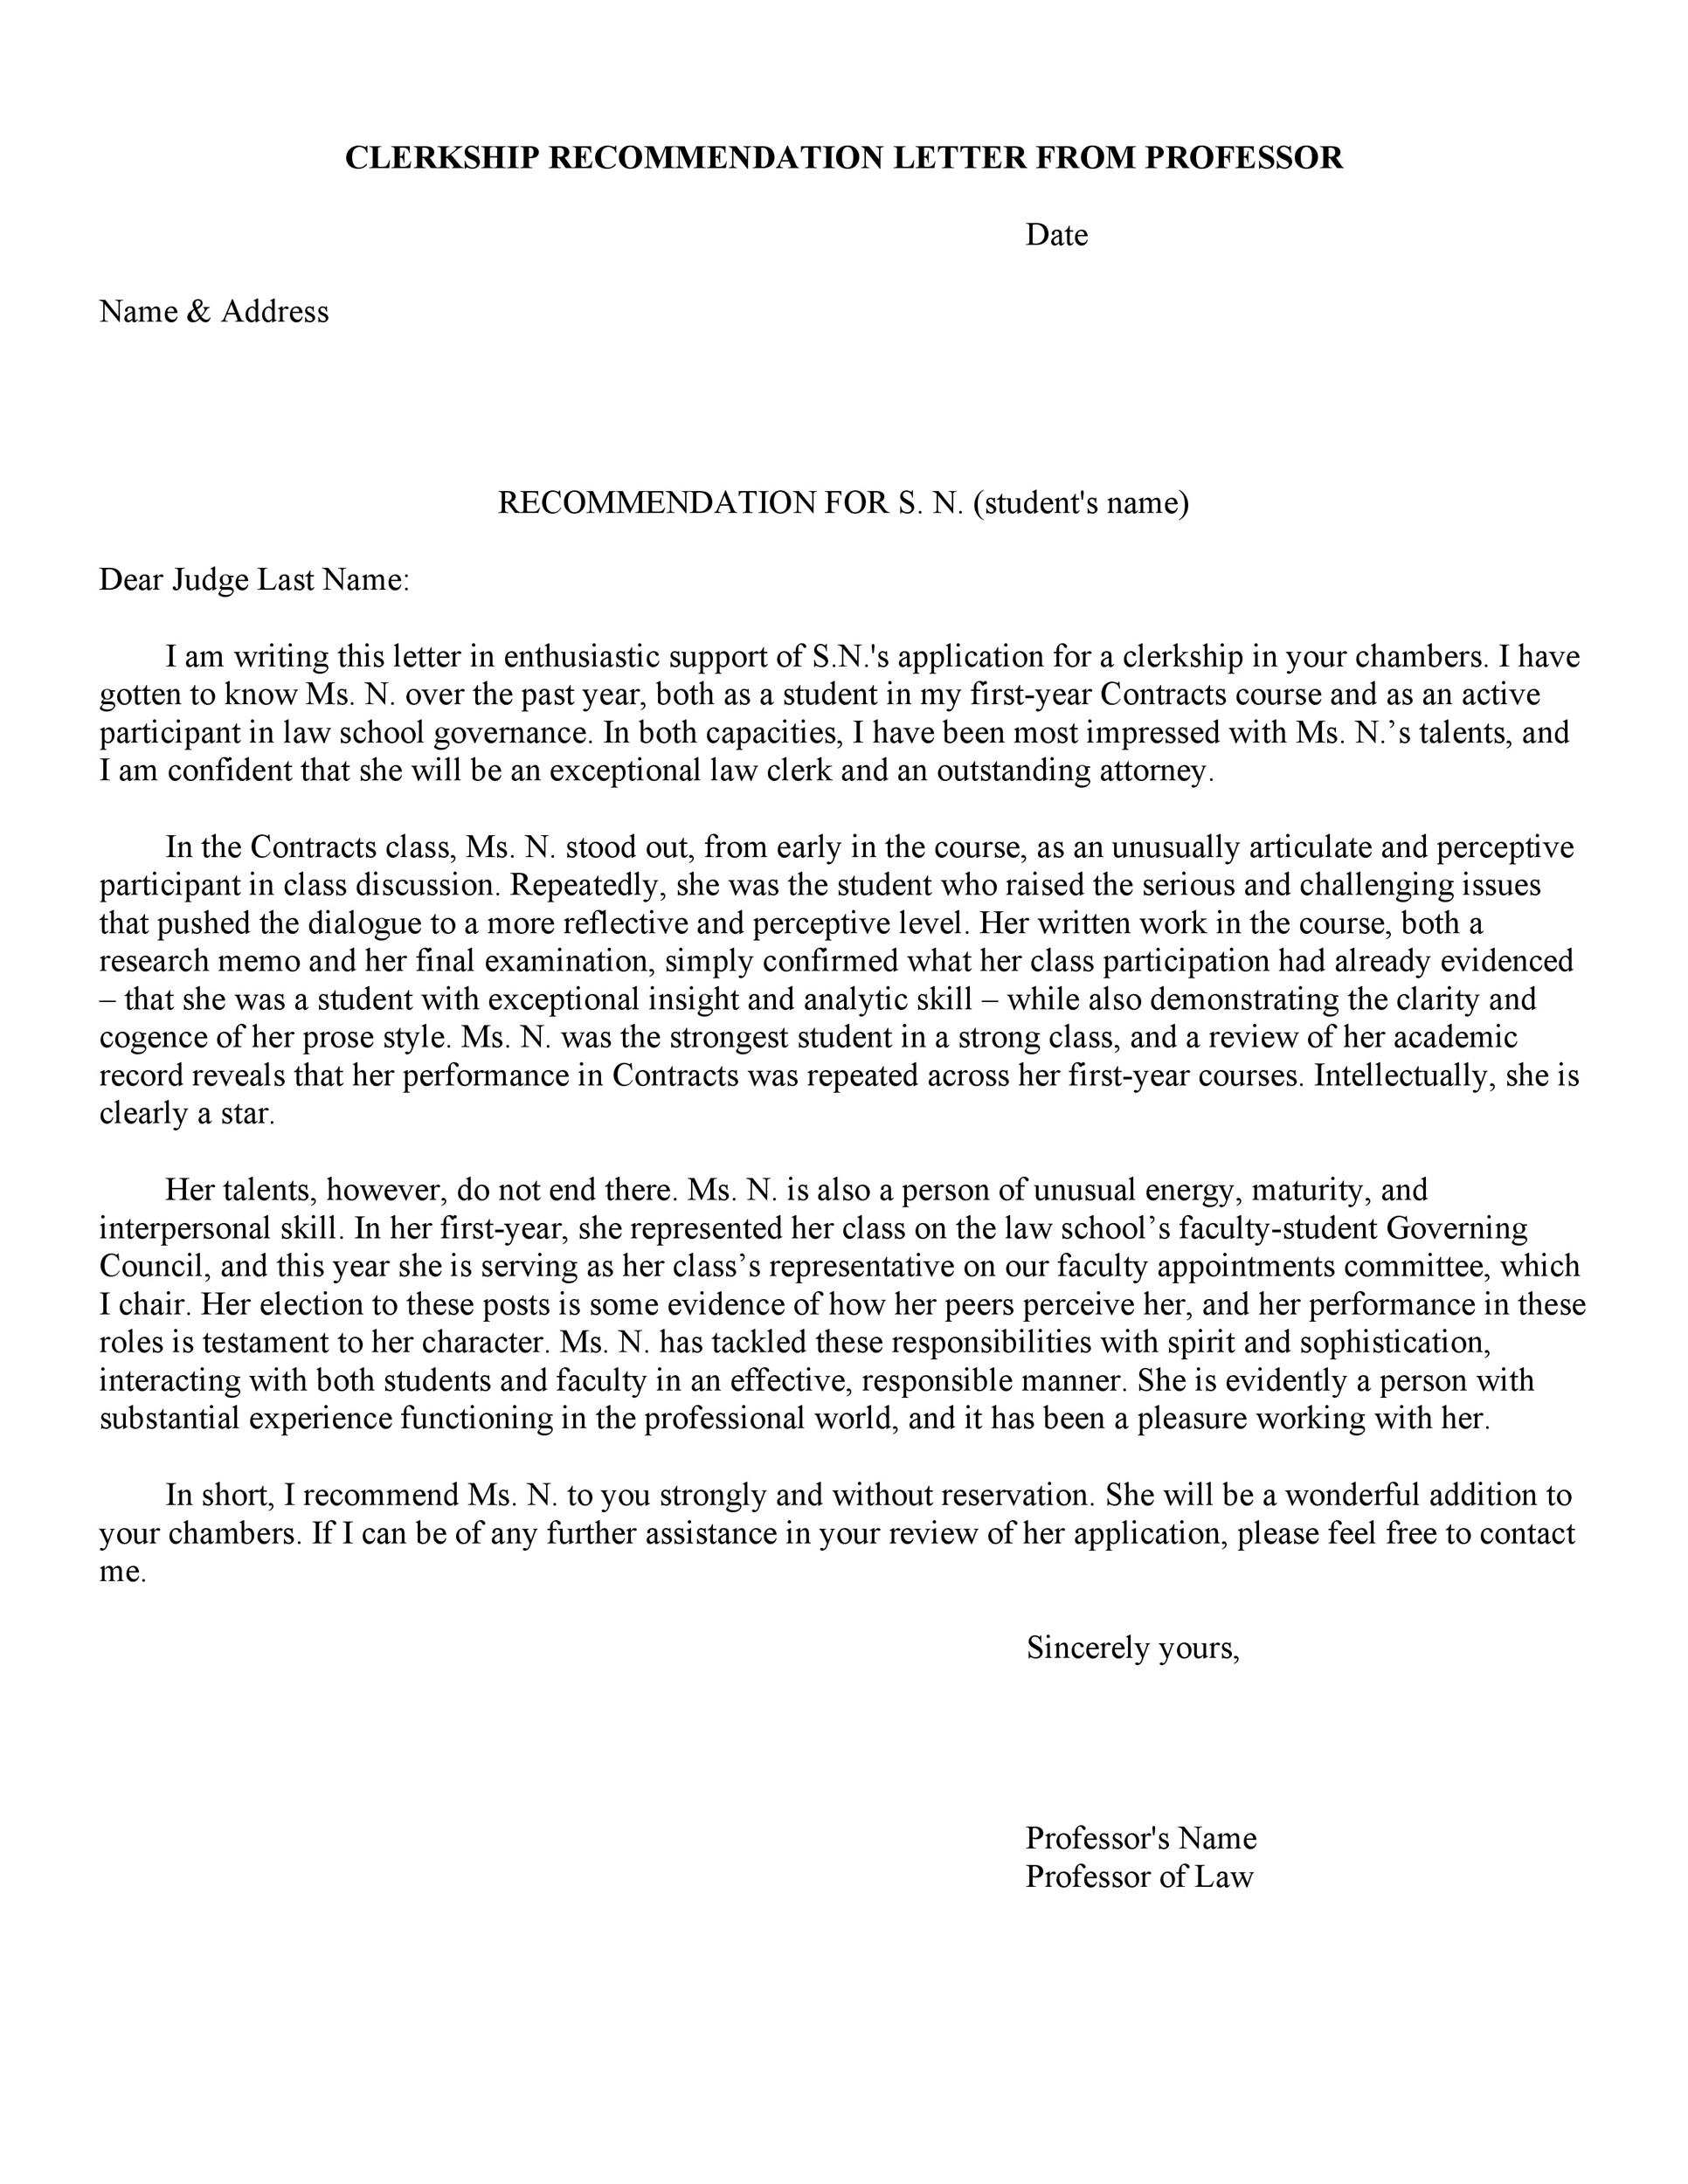 cal state application letter of recommendation